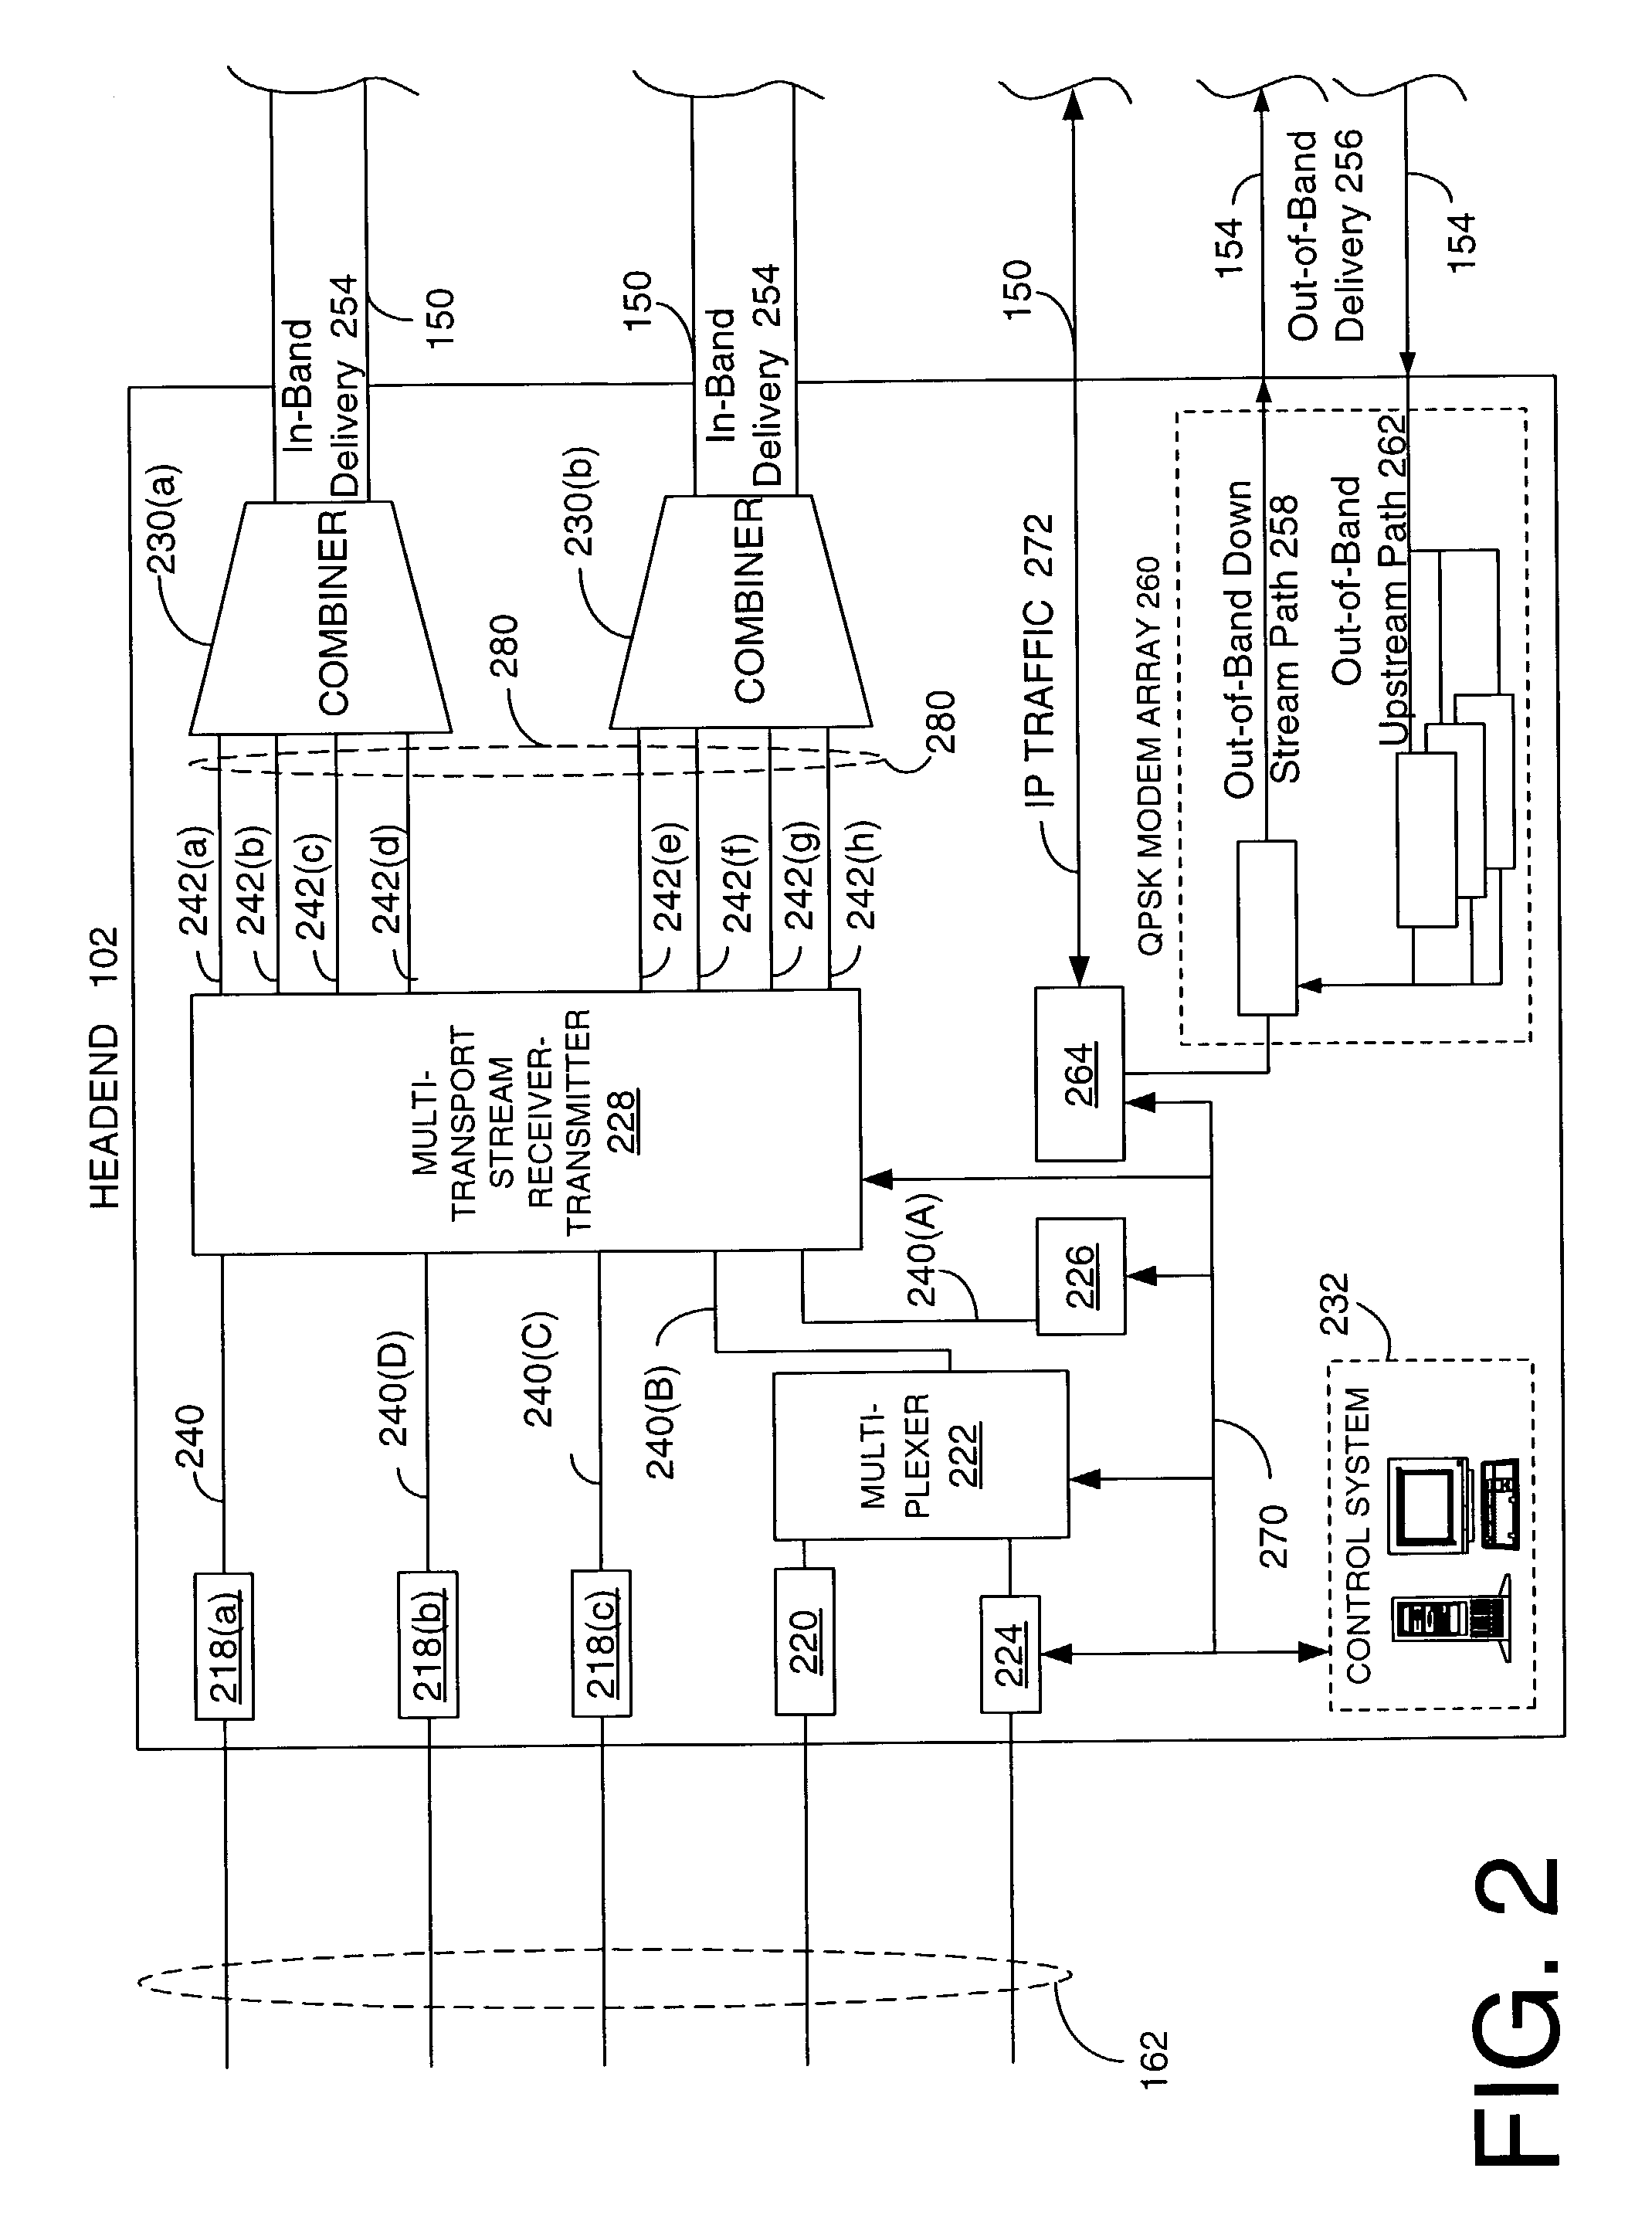 Apparatus for encryption key management